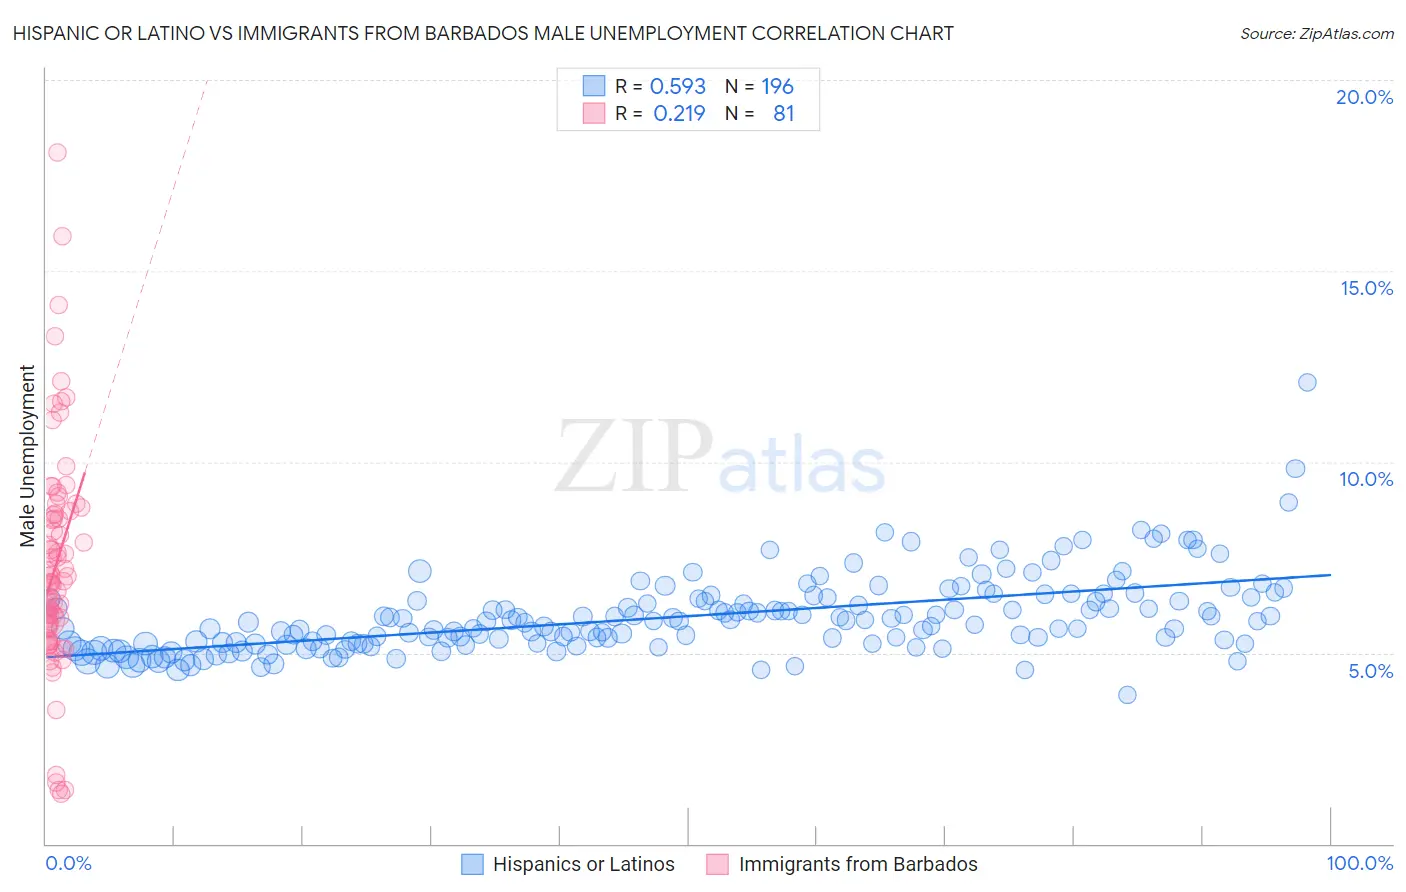 Hispanic or Latino vs Immigrants from Barbados Male Unemployment